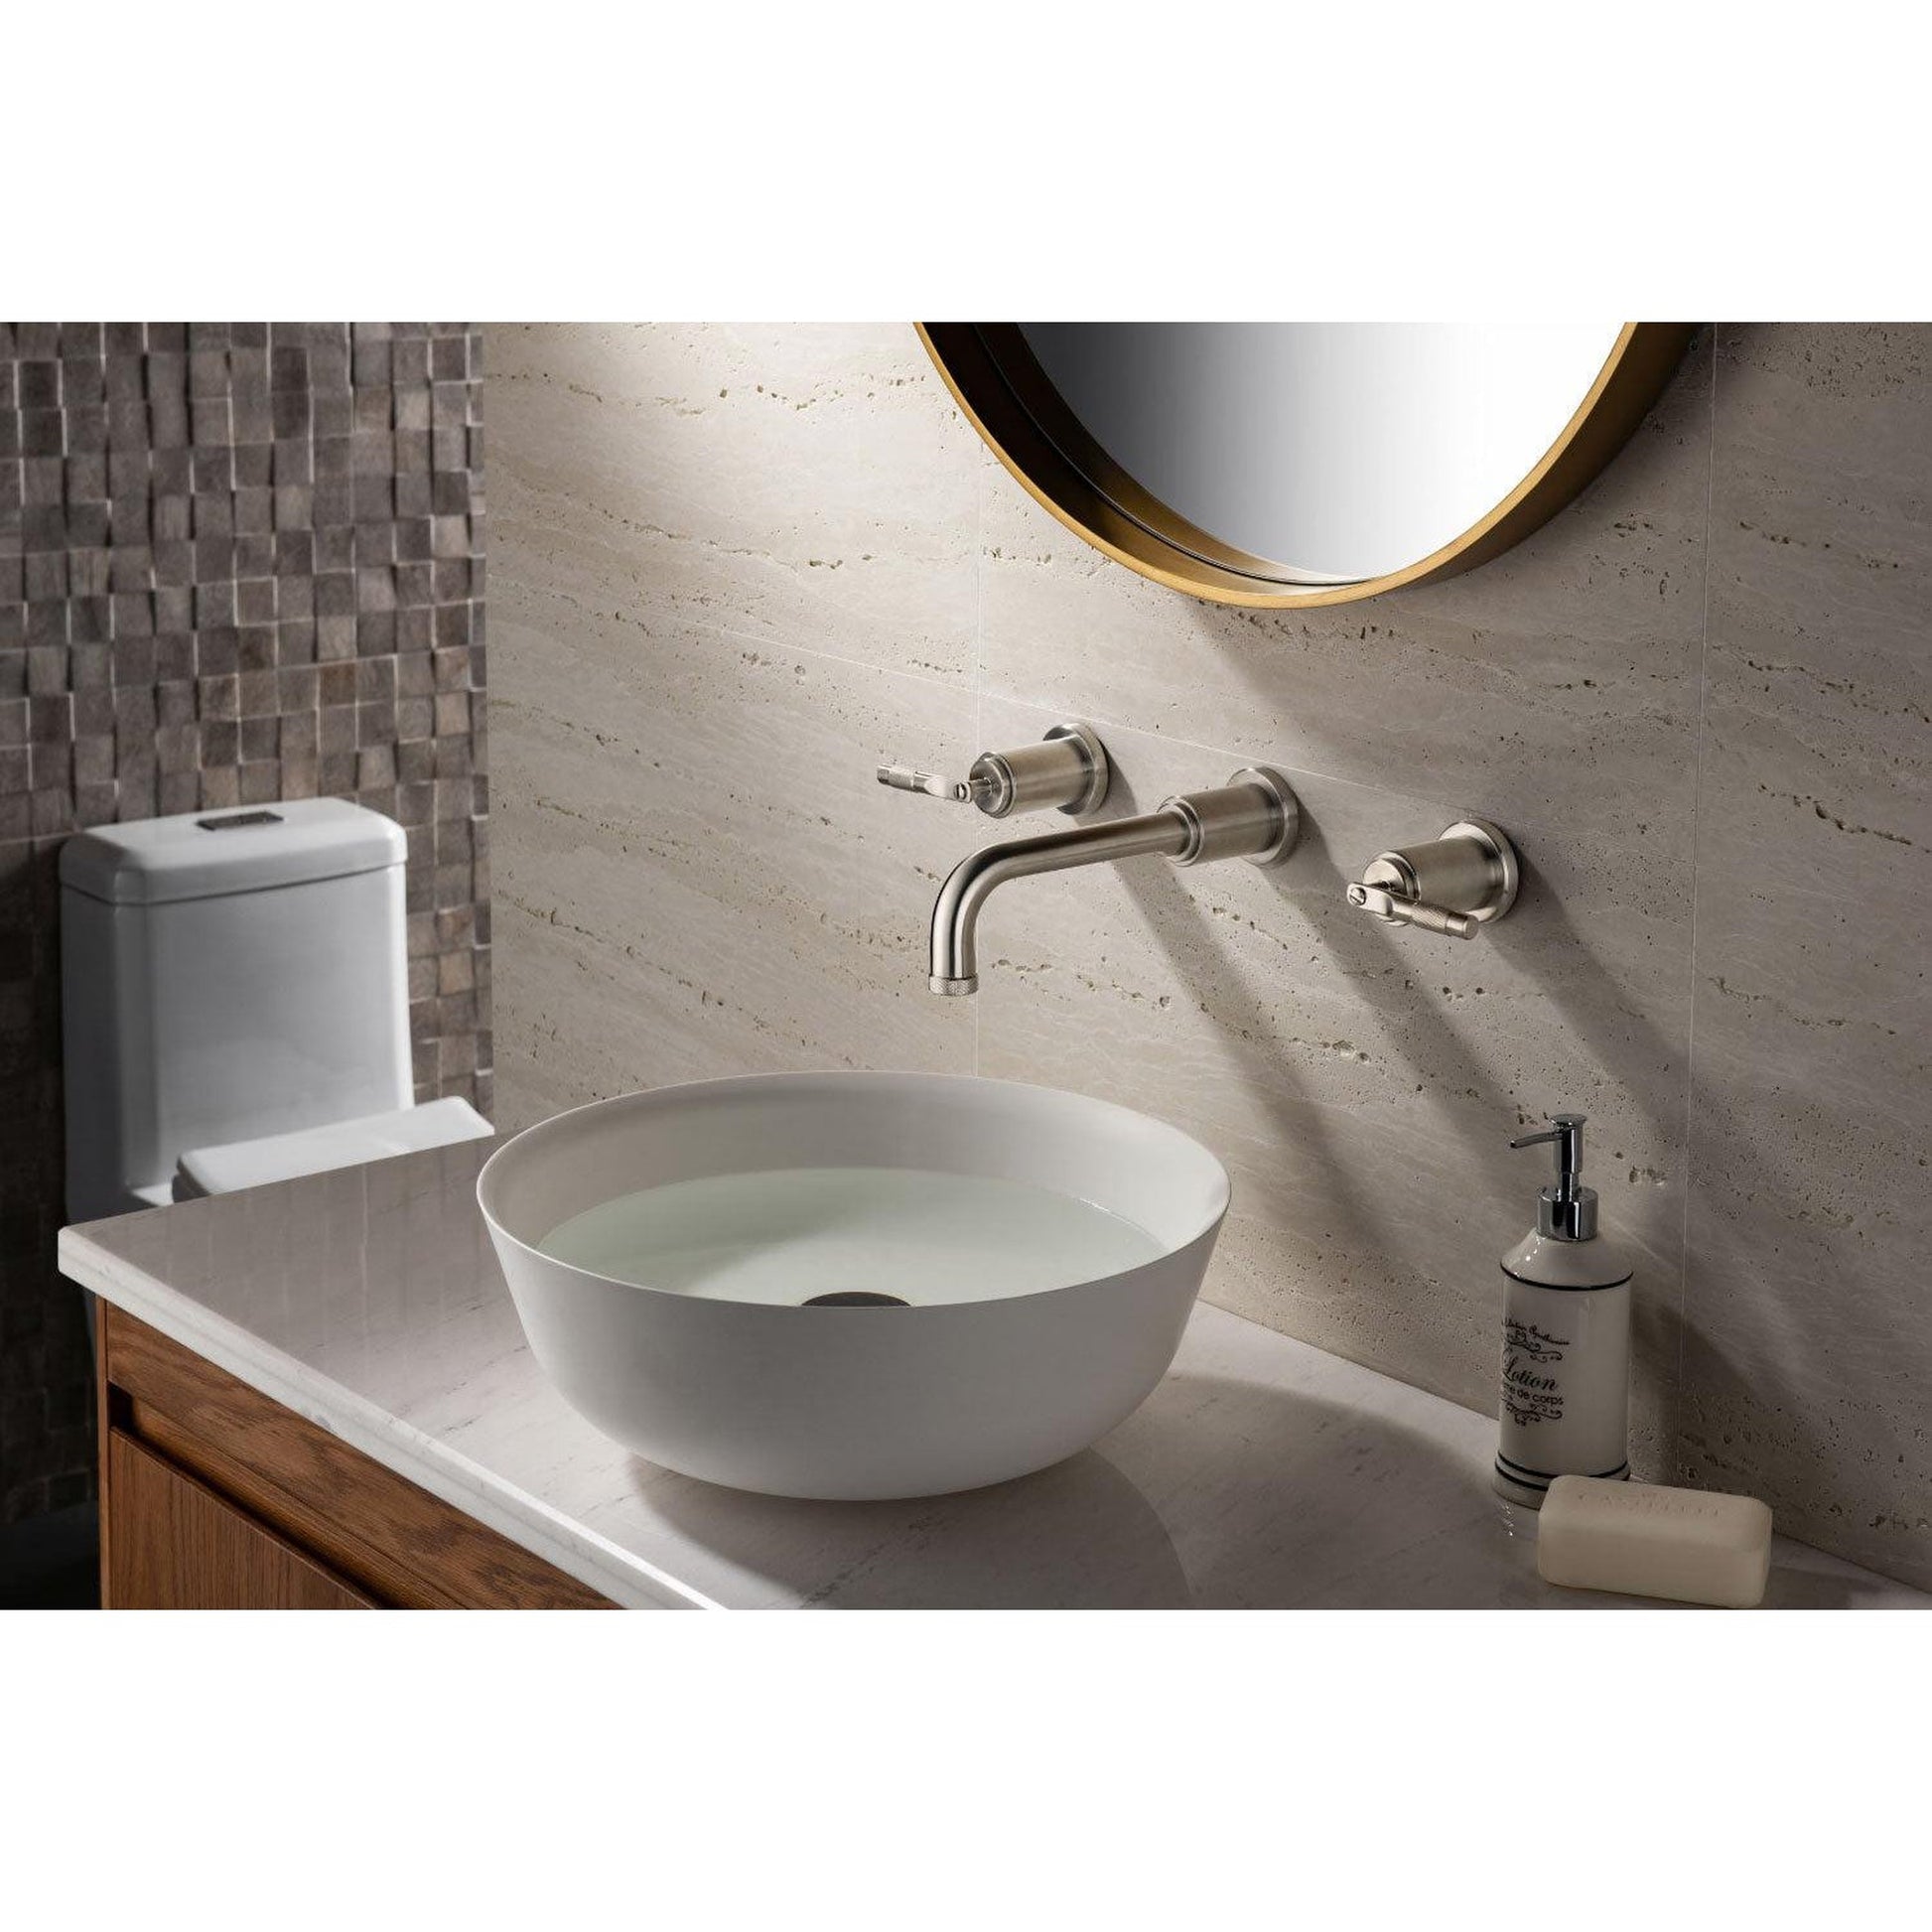 Isenberg Serie 250 8" Three-Hole Chrome Wall-Mounted Bathroom Sink Faucet With 0.50" Rough-In Valve